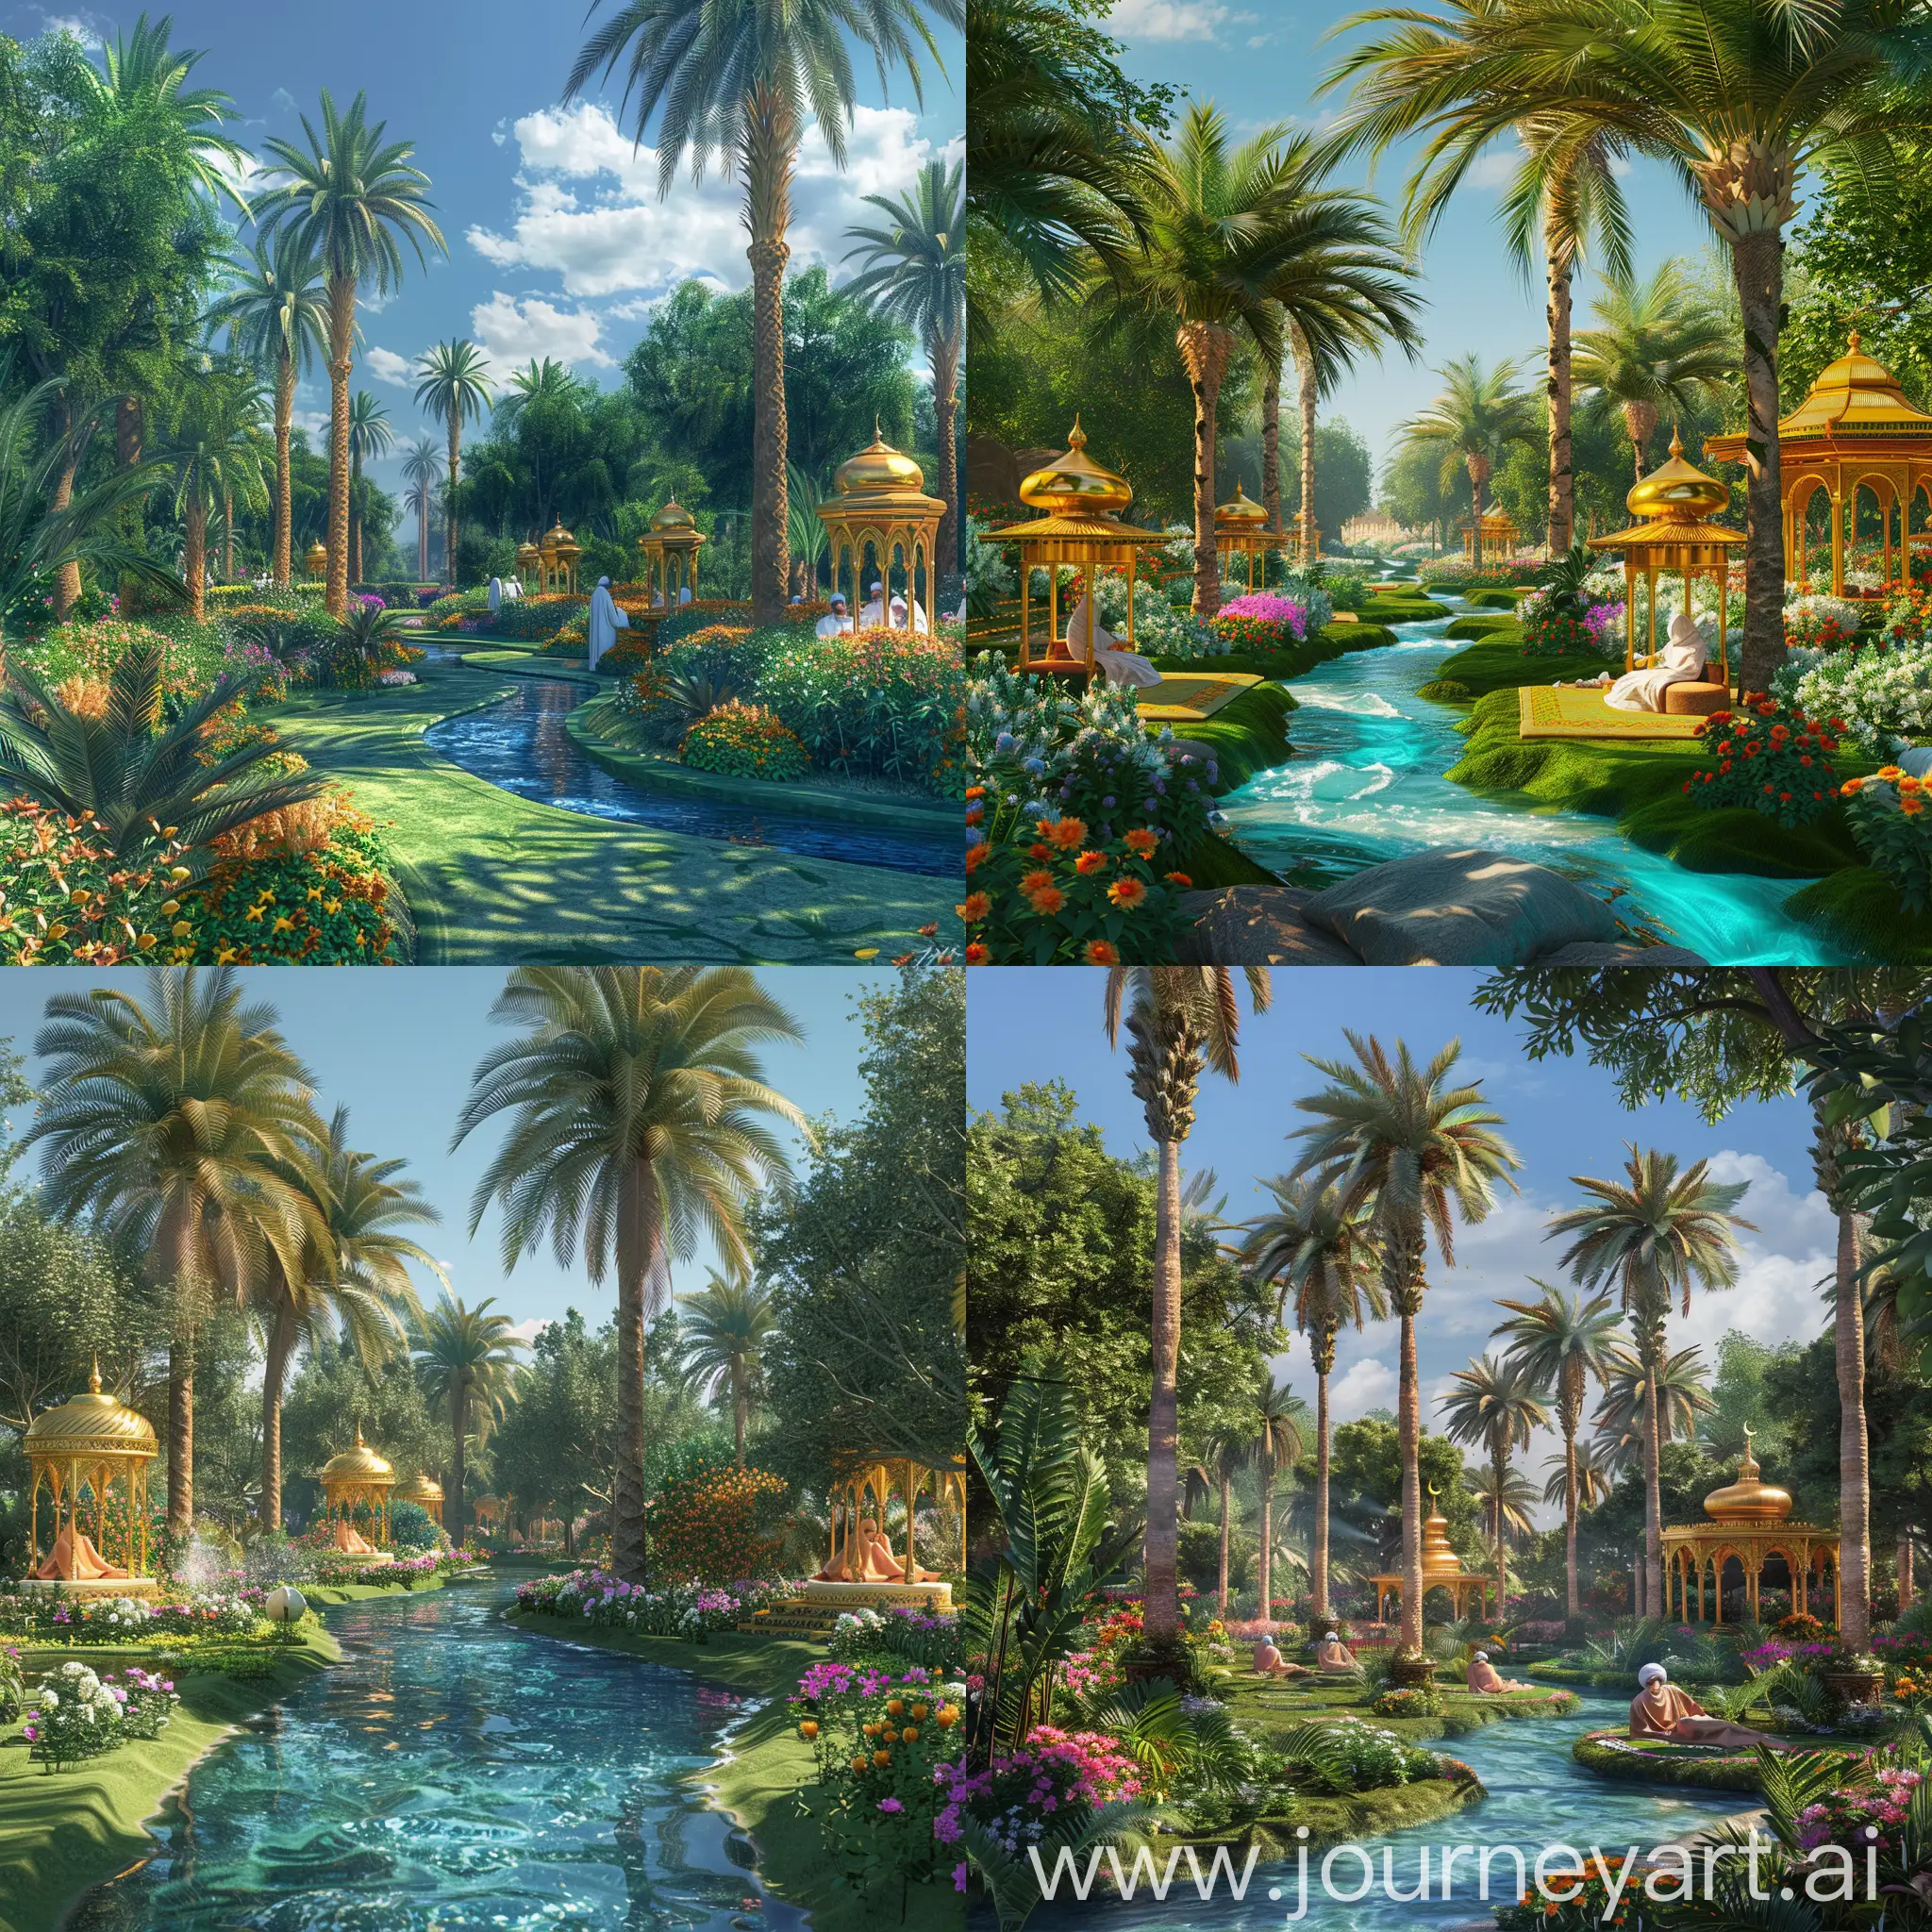 Tranquil-Oasis-of-Jannah-Paradise-Dwelling-in-Serenity